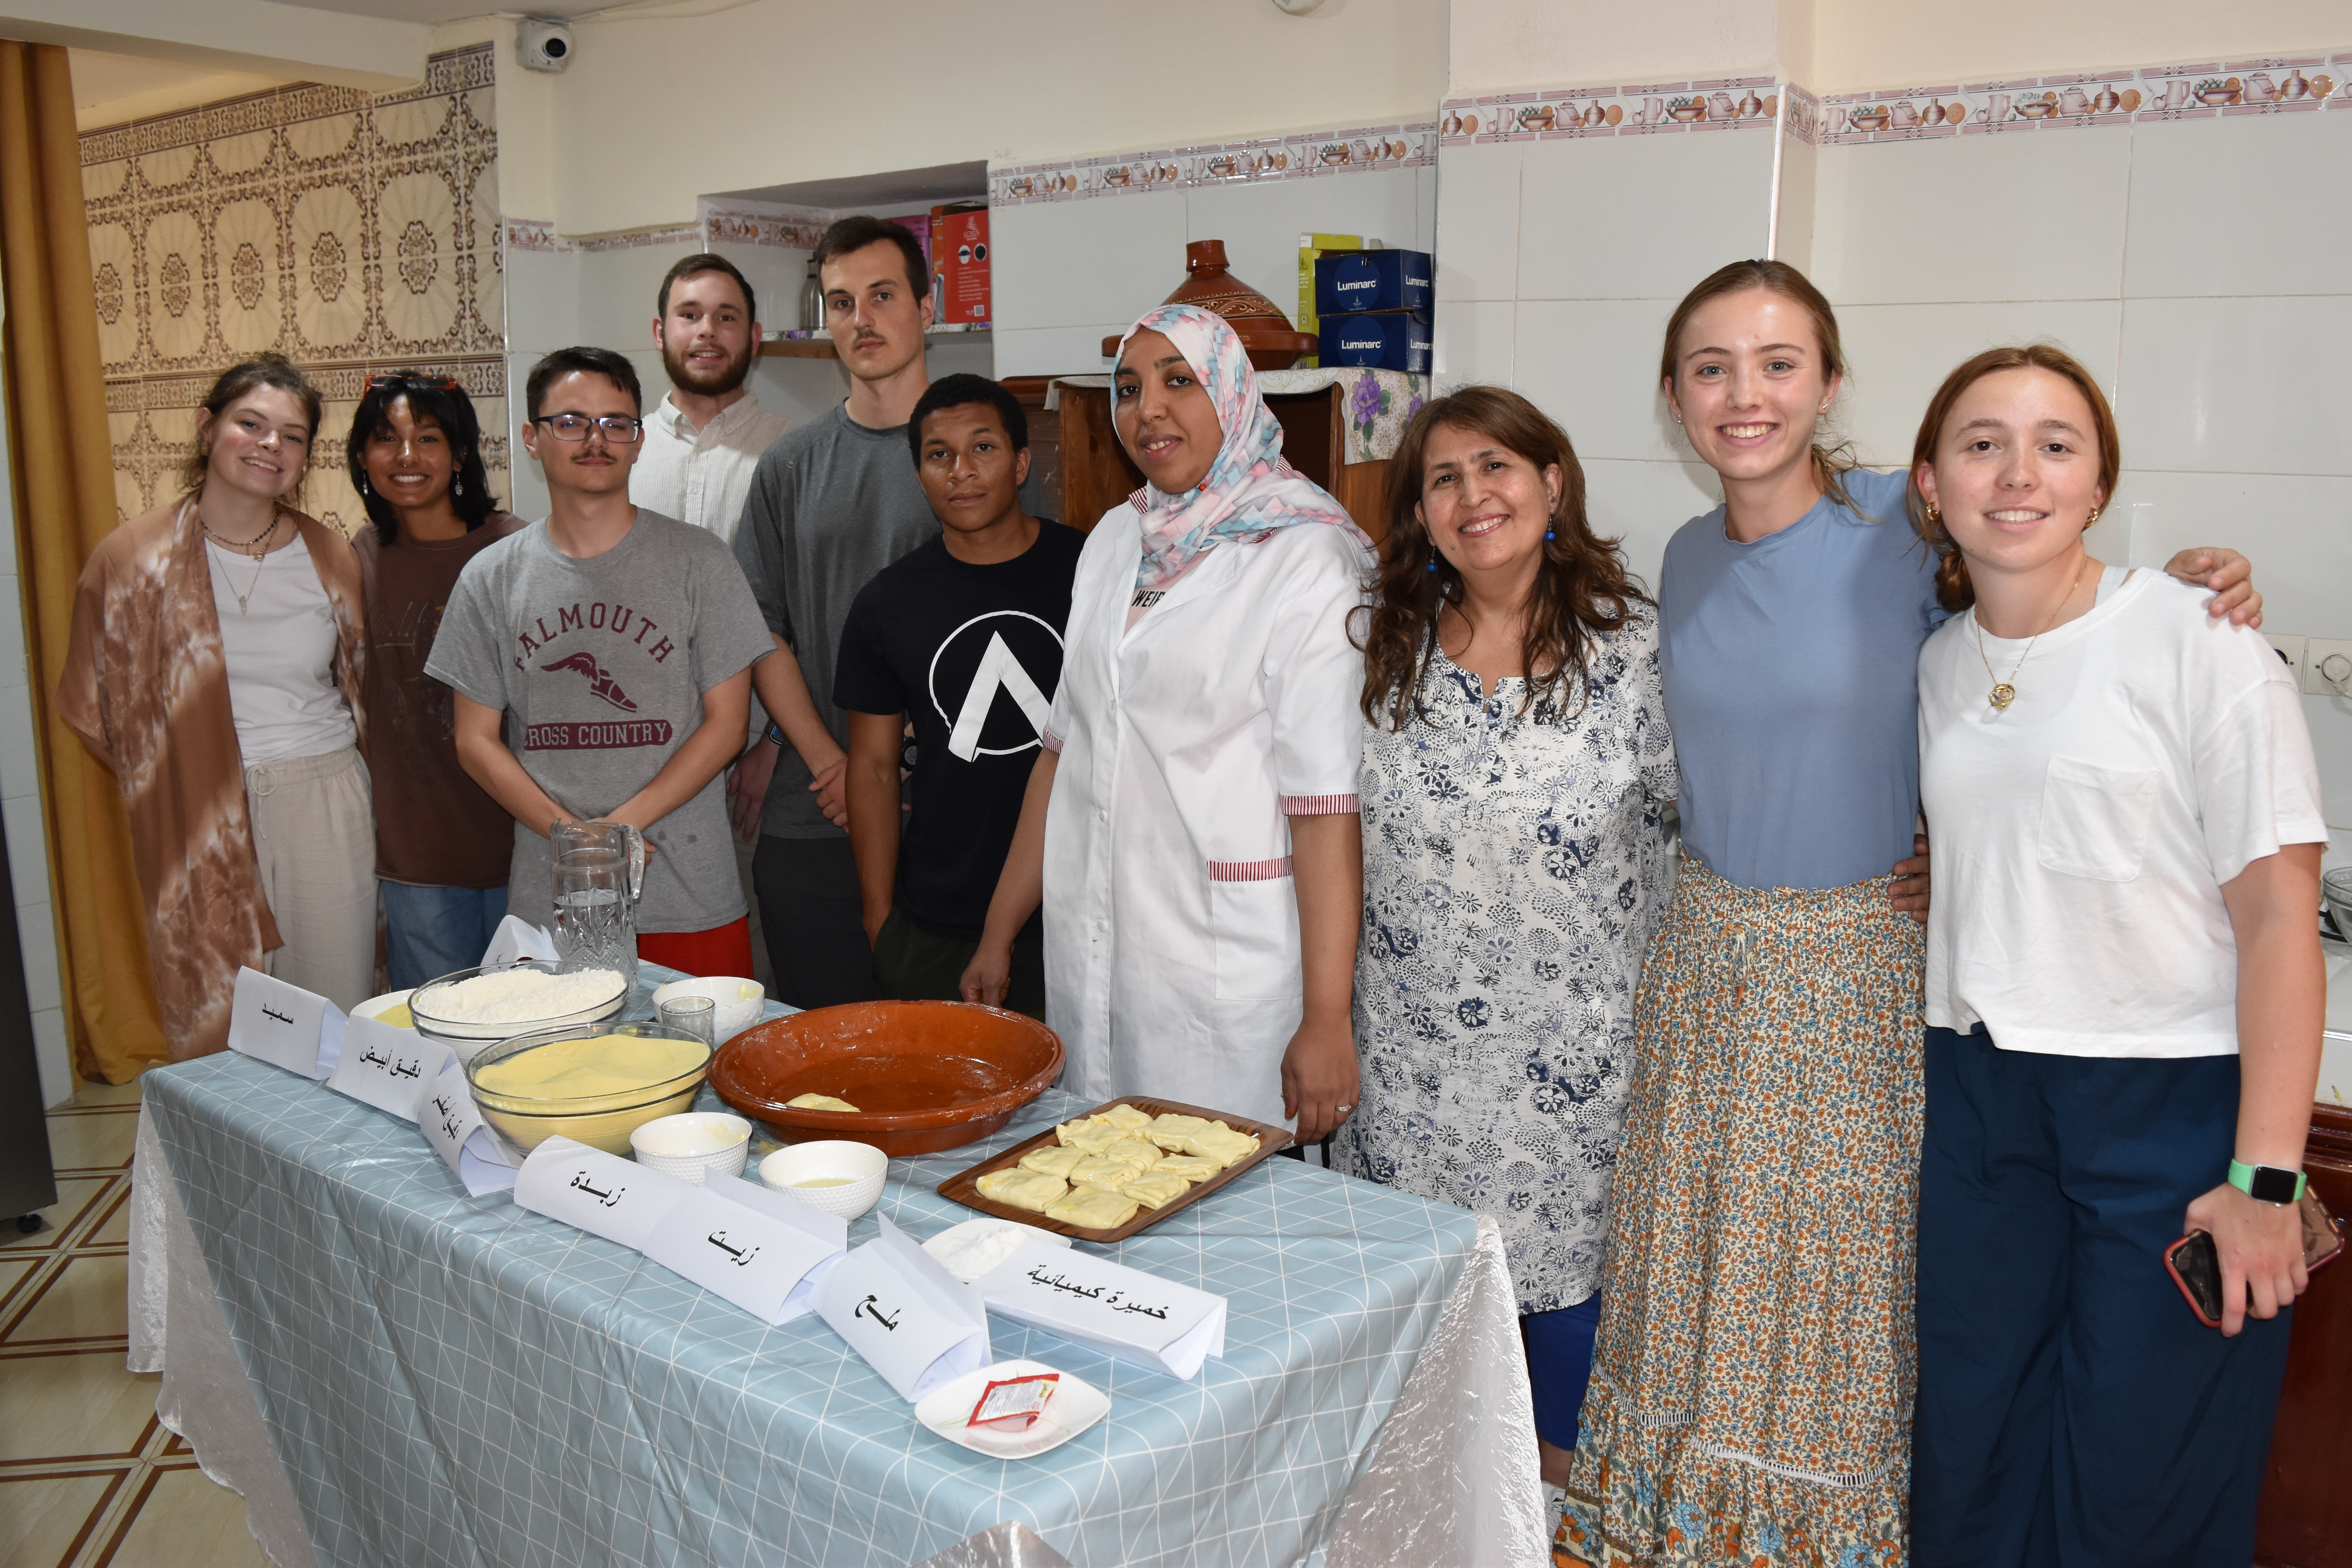 A group of students and community members in a kitchen.